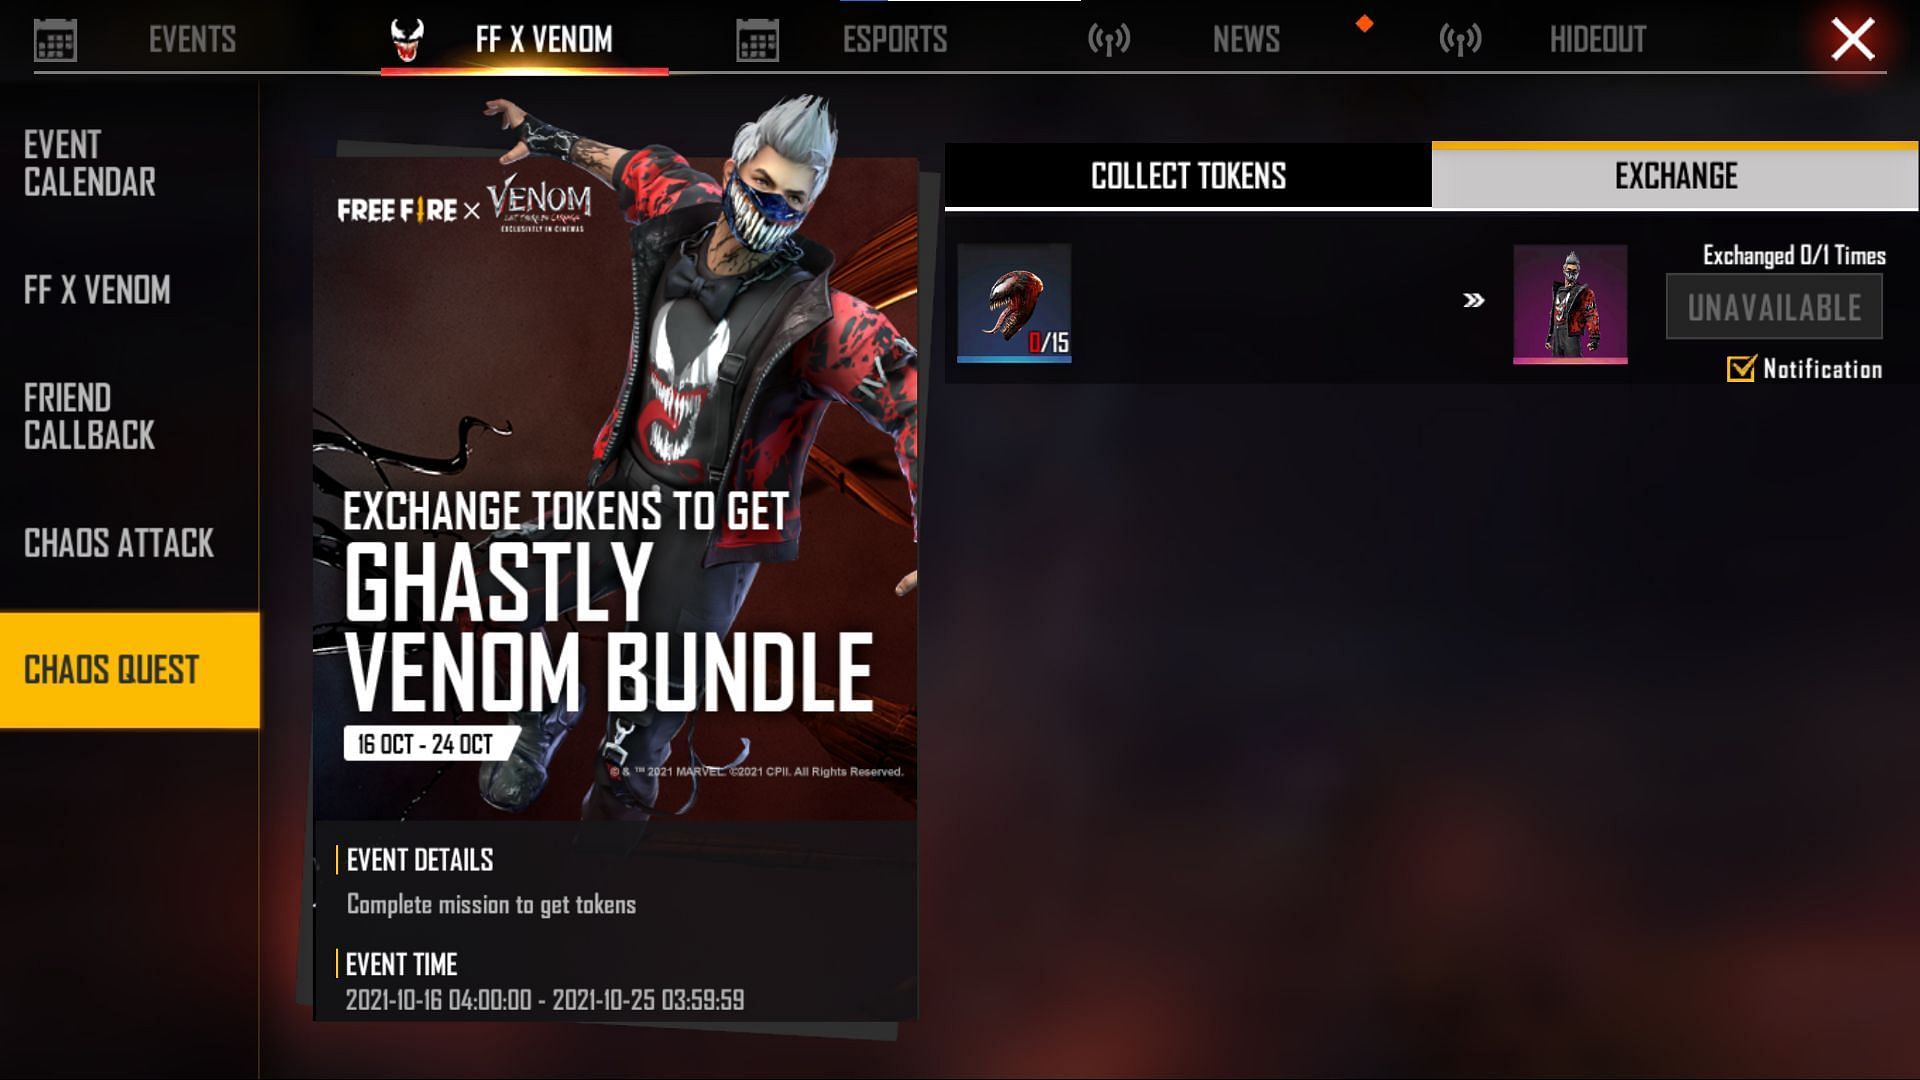 This bundle can be obtained by players through the Chaos Quest event (Image via Free Fire)